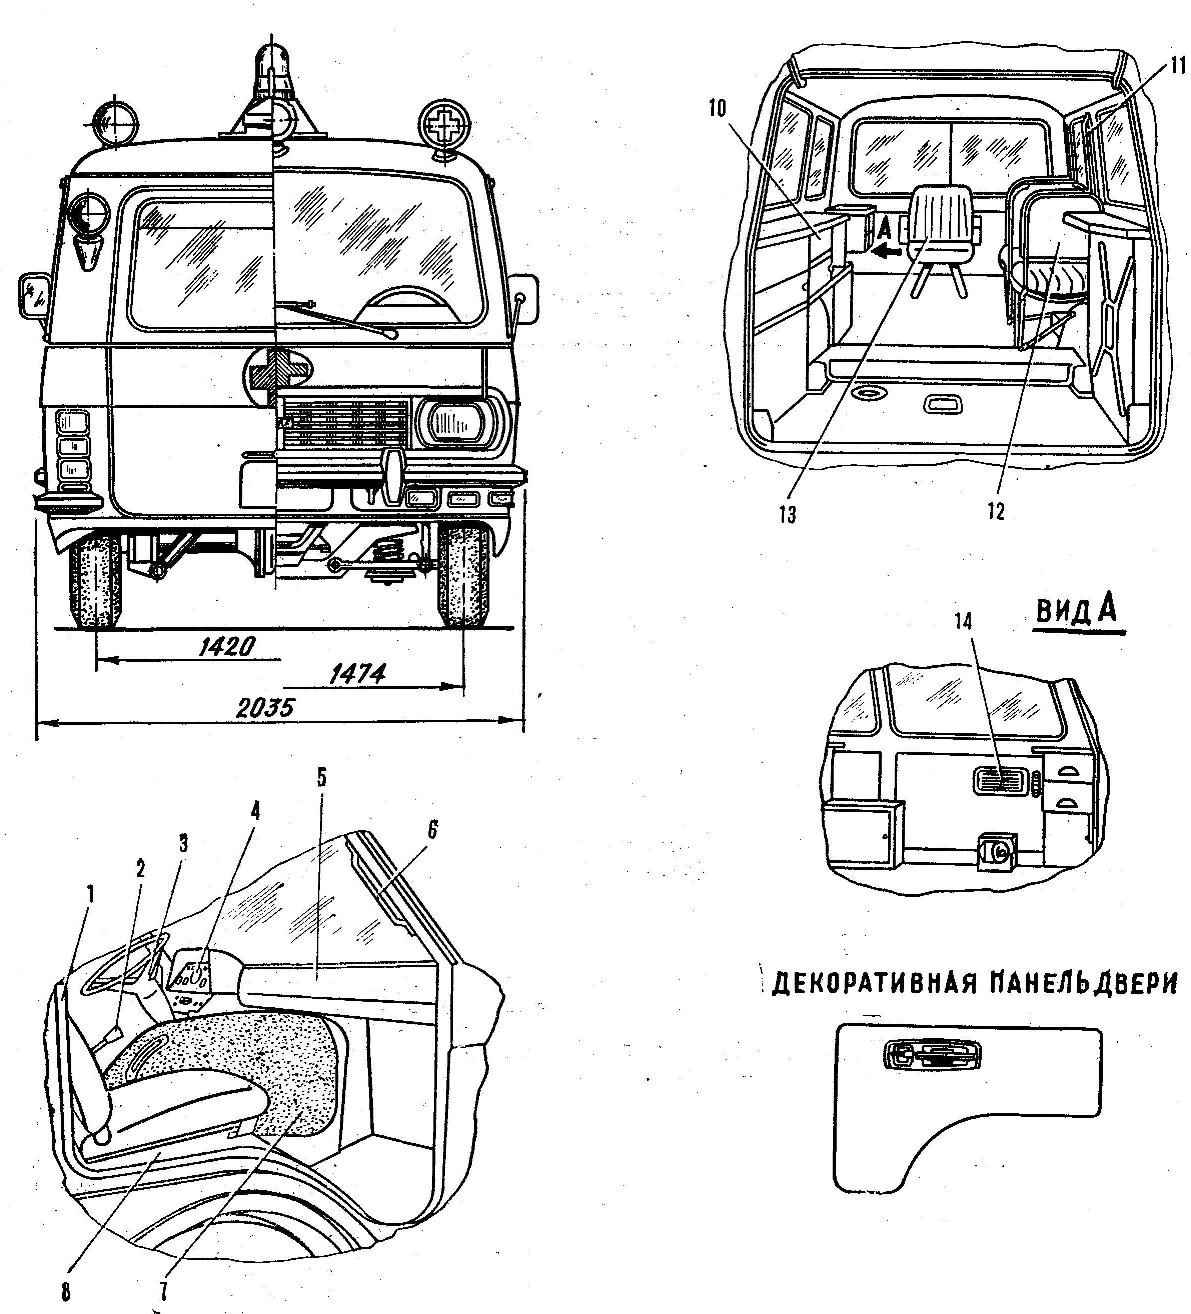 Fig. 2. The driver's seat